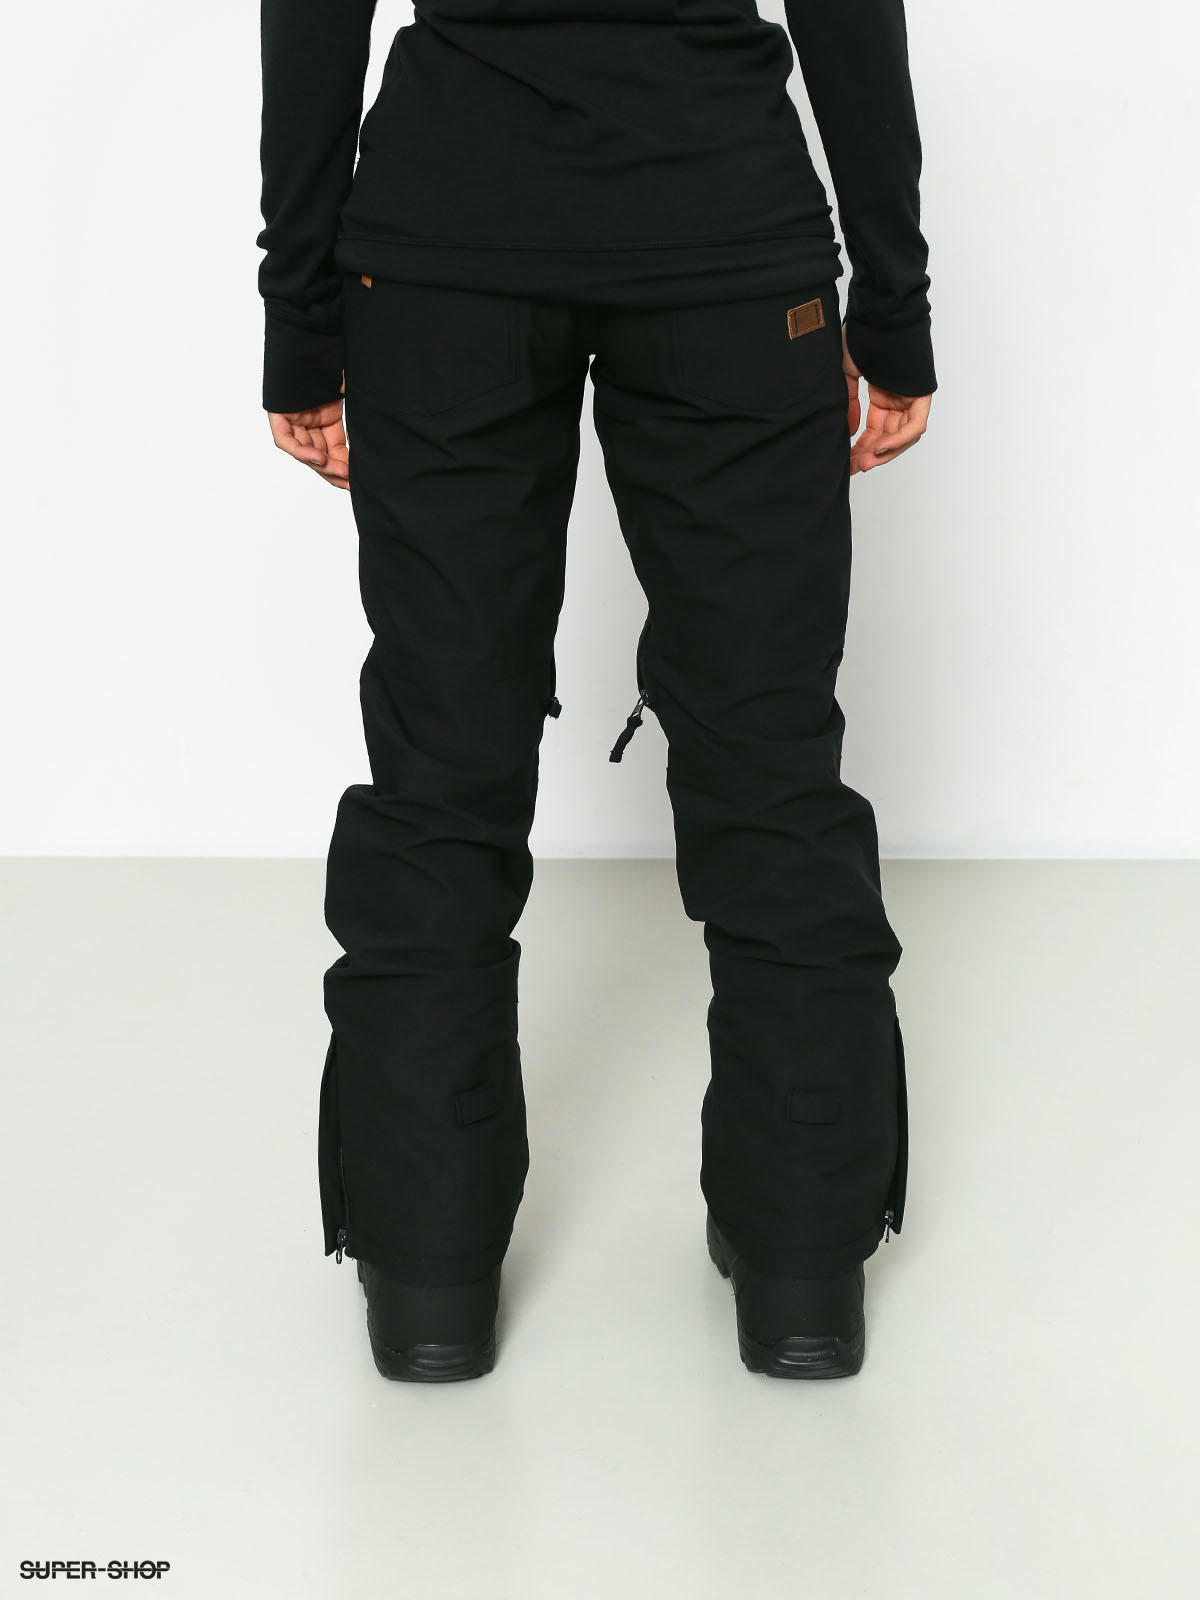 The North Face Aboutaday Snowboard pants Wmn (tnf black)